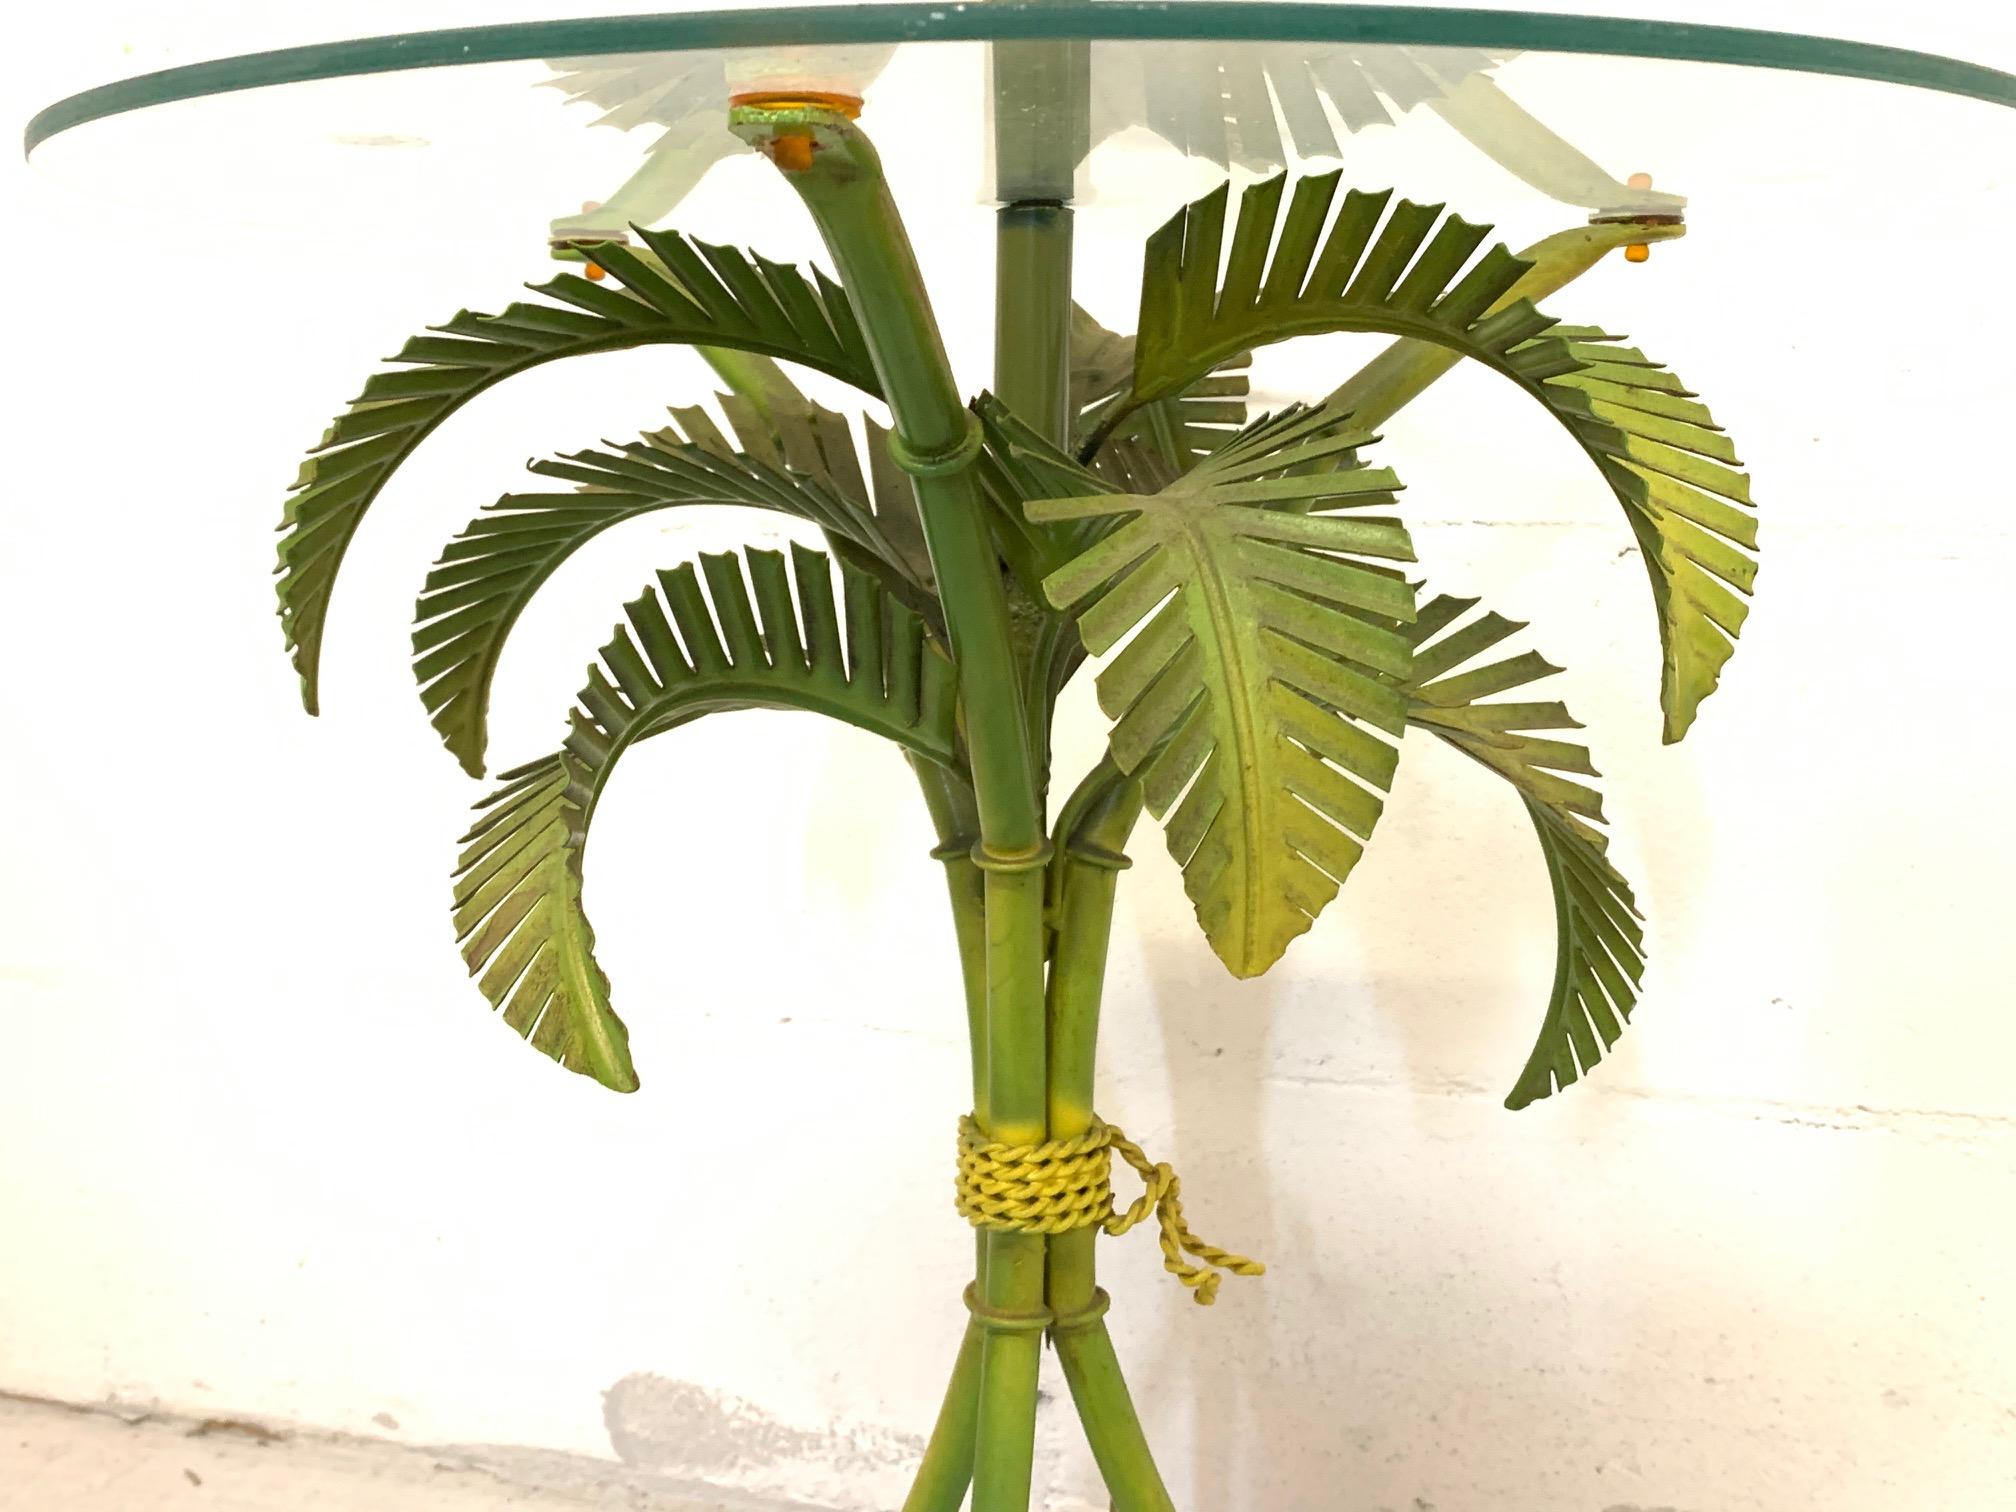 Vintage floor lamp features sculptural tole metal palm tree fronds and a round glass shelf. Good vintage condition with minor imperfections consistent with age.